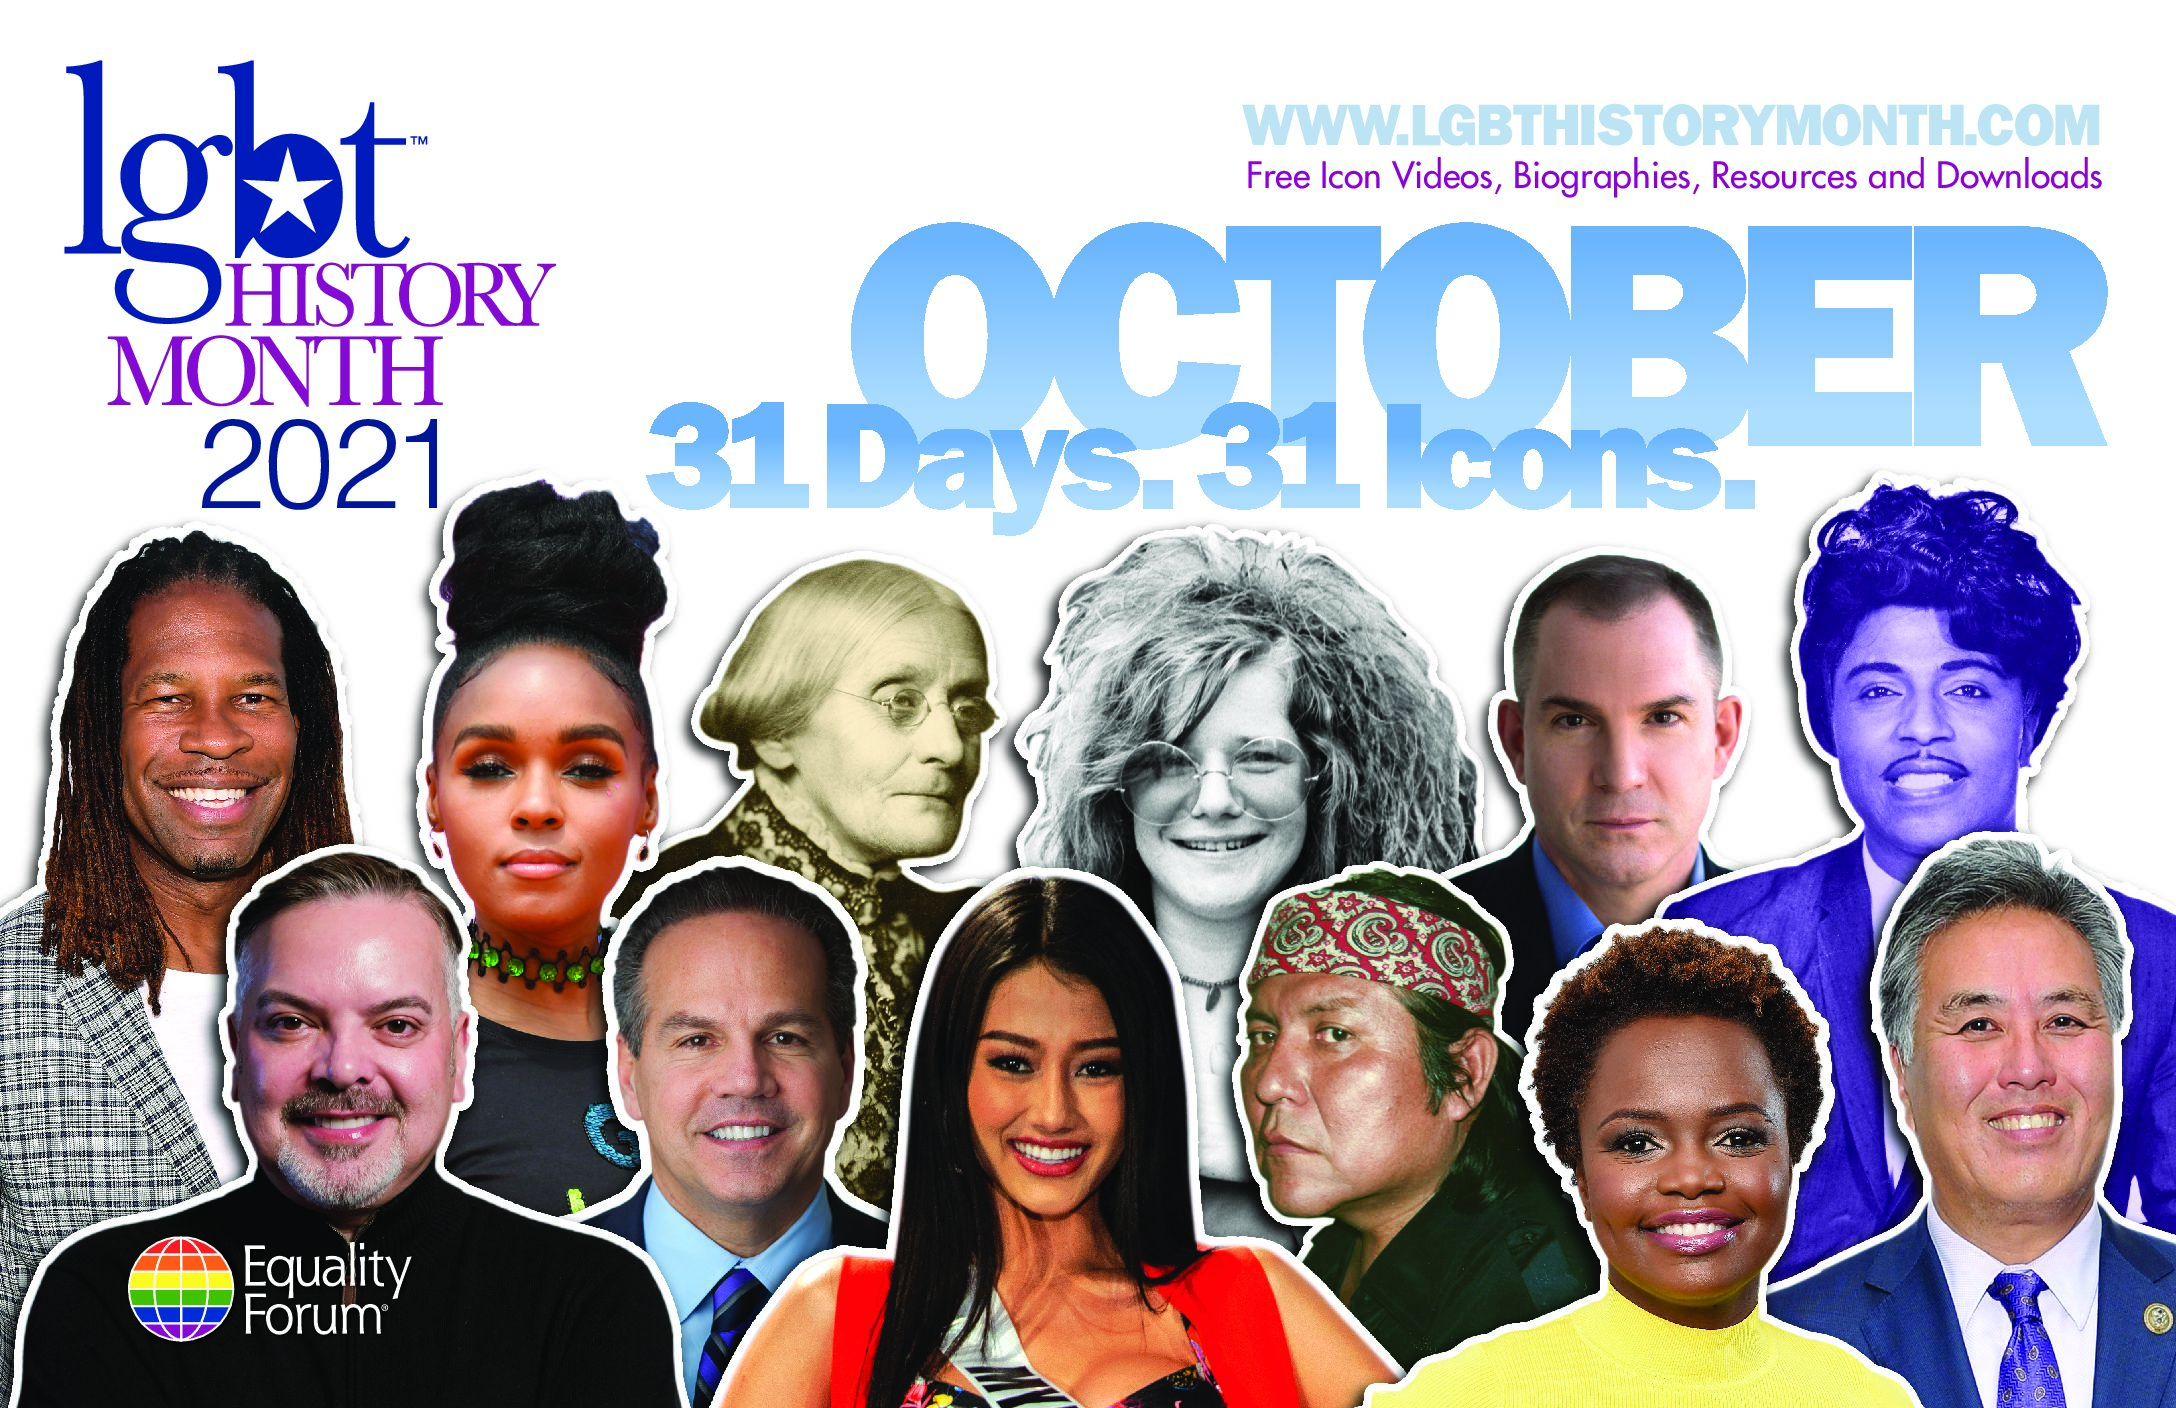 Lgbtq+historymonth.com honours 31 icons in October.